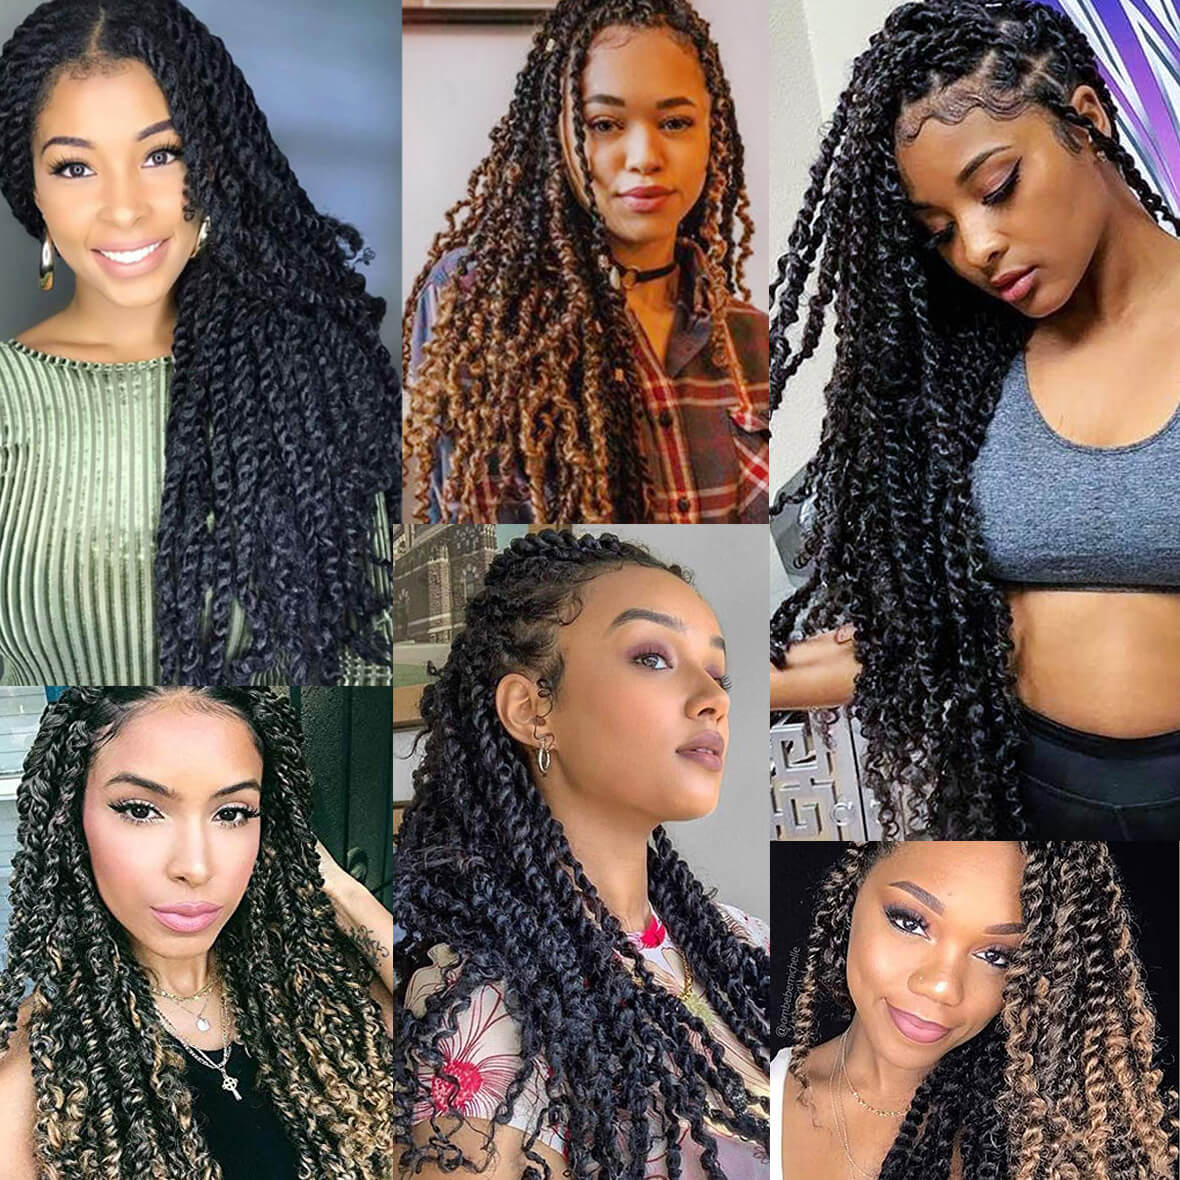 18 Passion Twist Hair Crochet Braid Extensions Water Wave